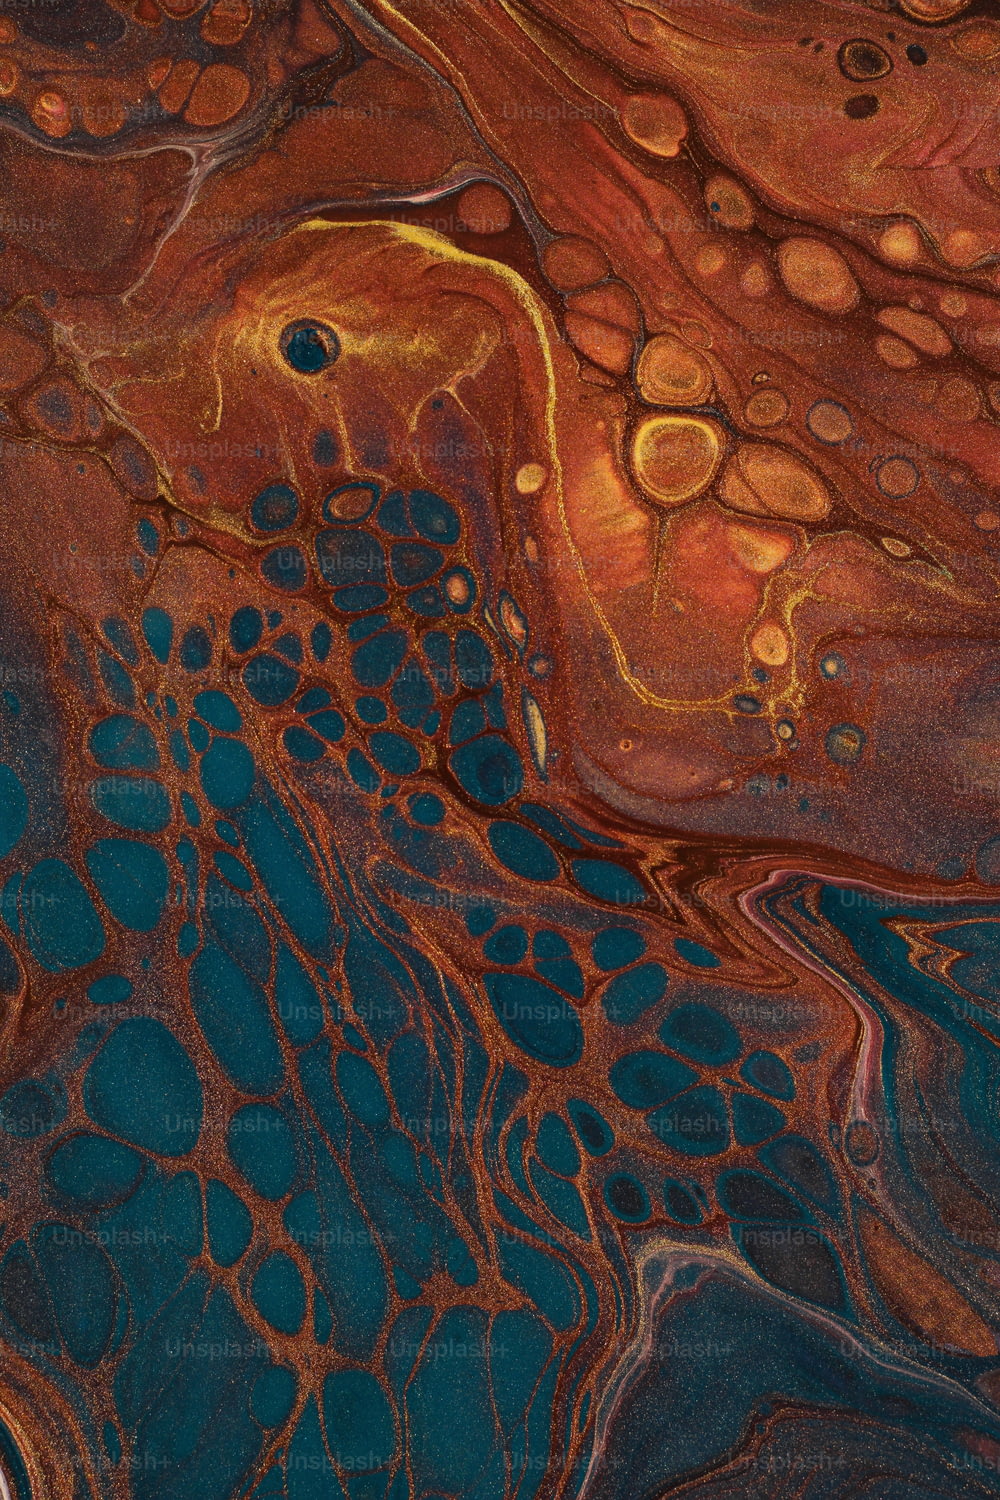 a close up view of a blue and brown surface